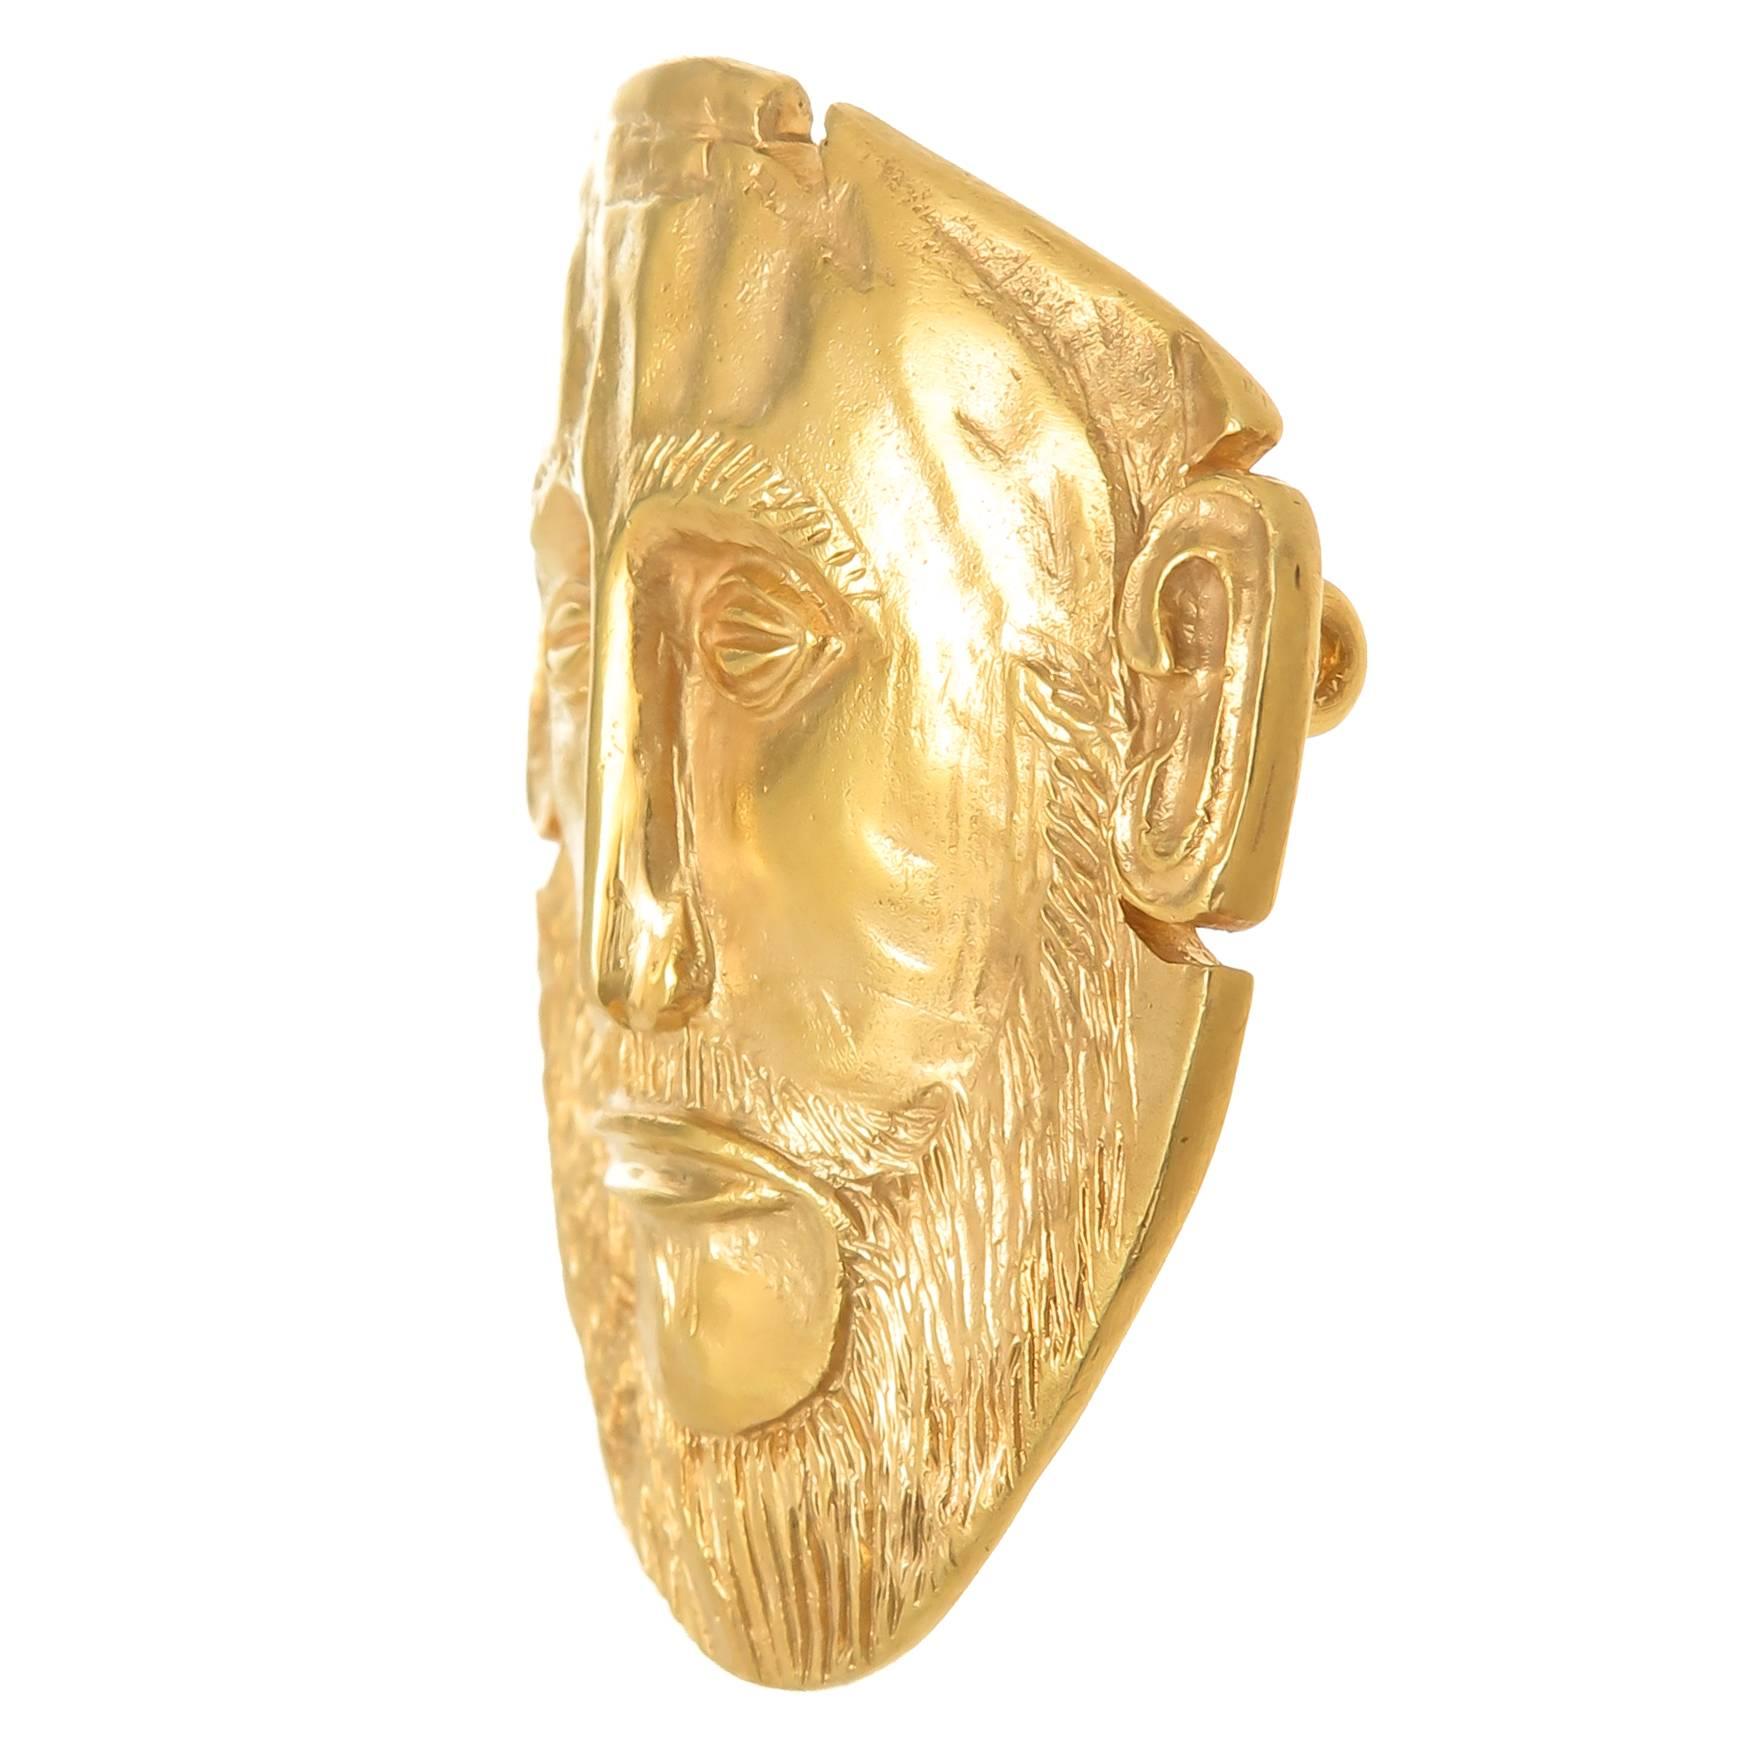 Circa 1990 Zolotas 18K Yellow Gold Pendant Brooch of a Mask in an Ancient Roman Greek Design, measuring 1 3/4 X 1 3/4 inch and having very fine detailing.  Weighing 21.3 Grams.